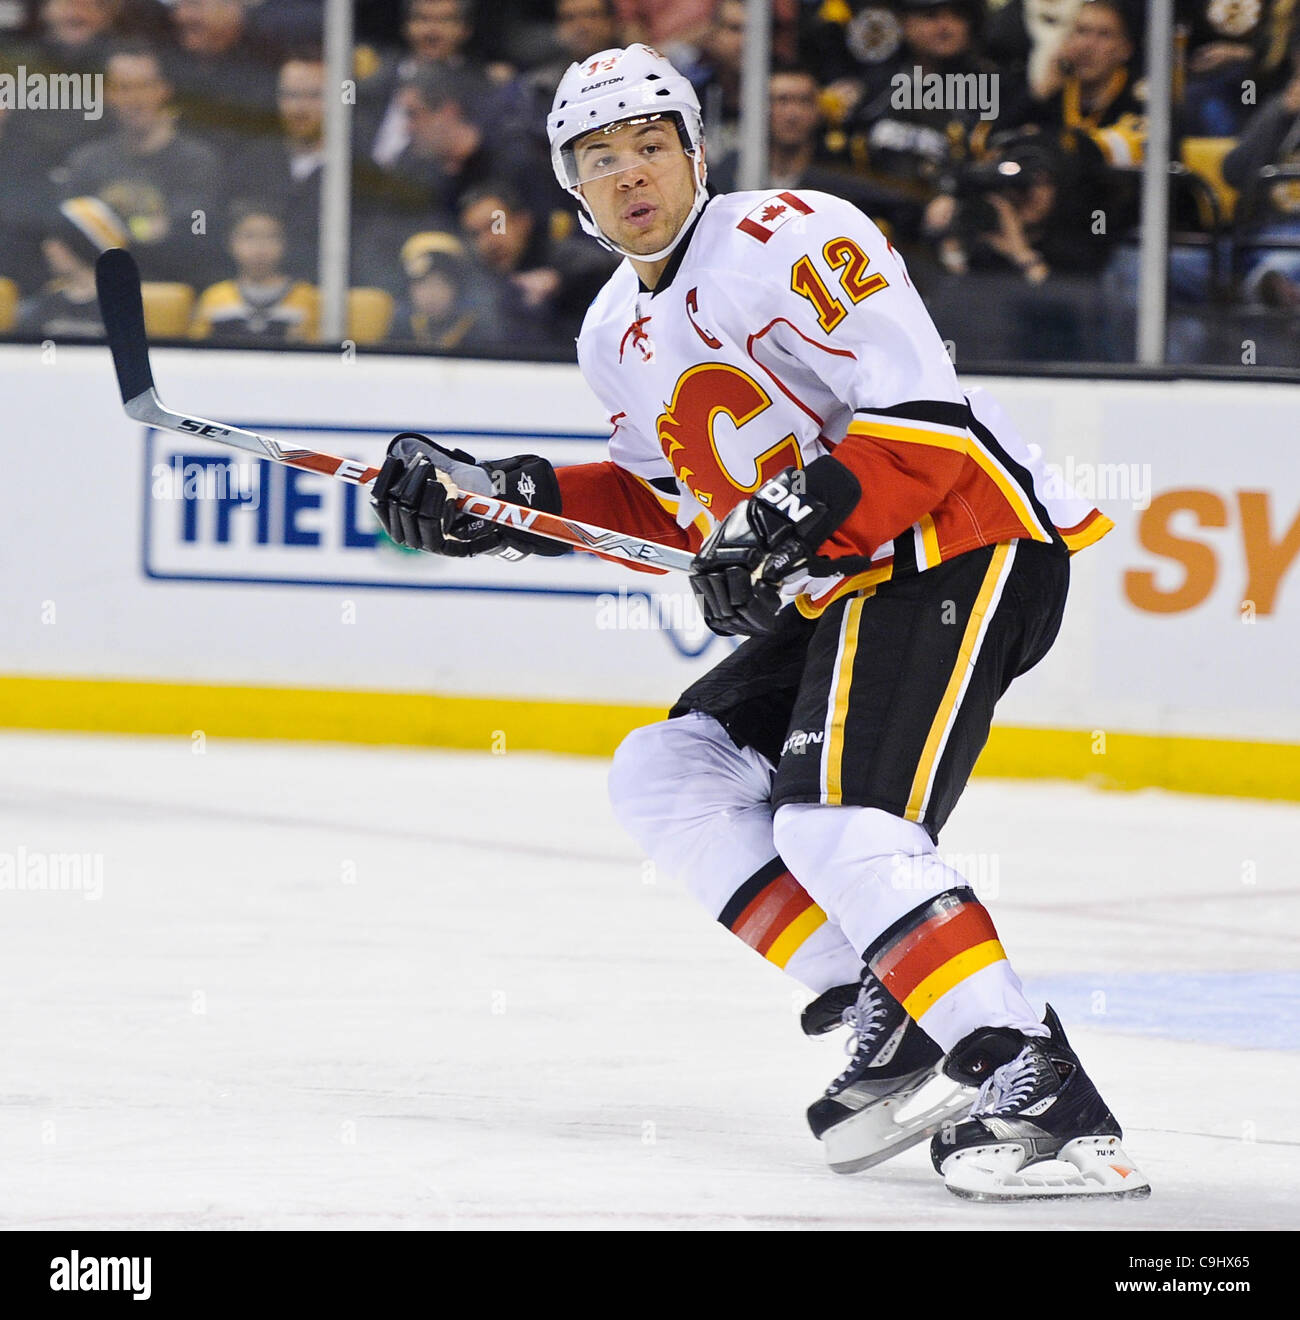 Calgary Flames right wing Jarome Iginla warms up at the Pepsi Center in  Denver on November 20, 2008. (UPI Photo/ Gary C. Caskey Stock Photo - Alamy